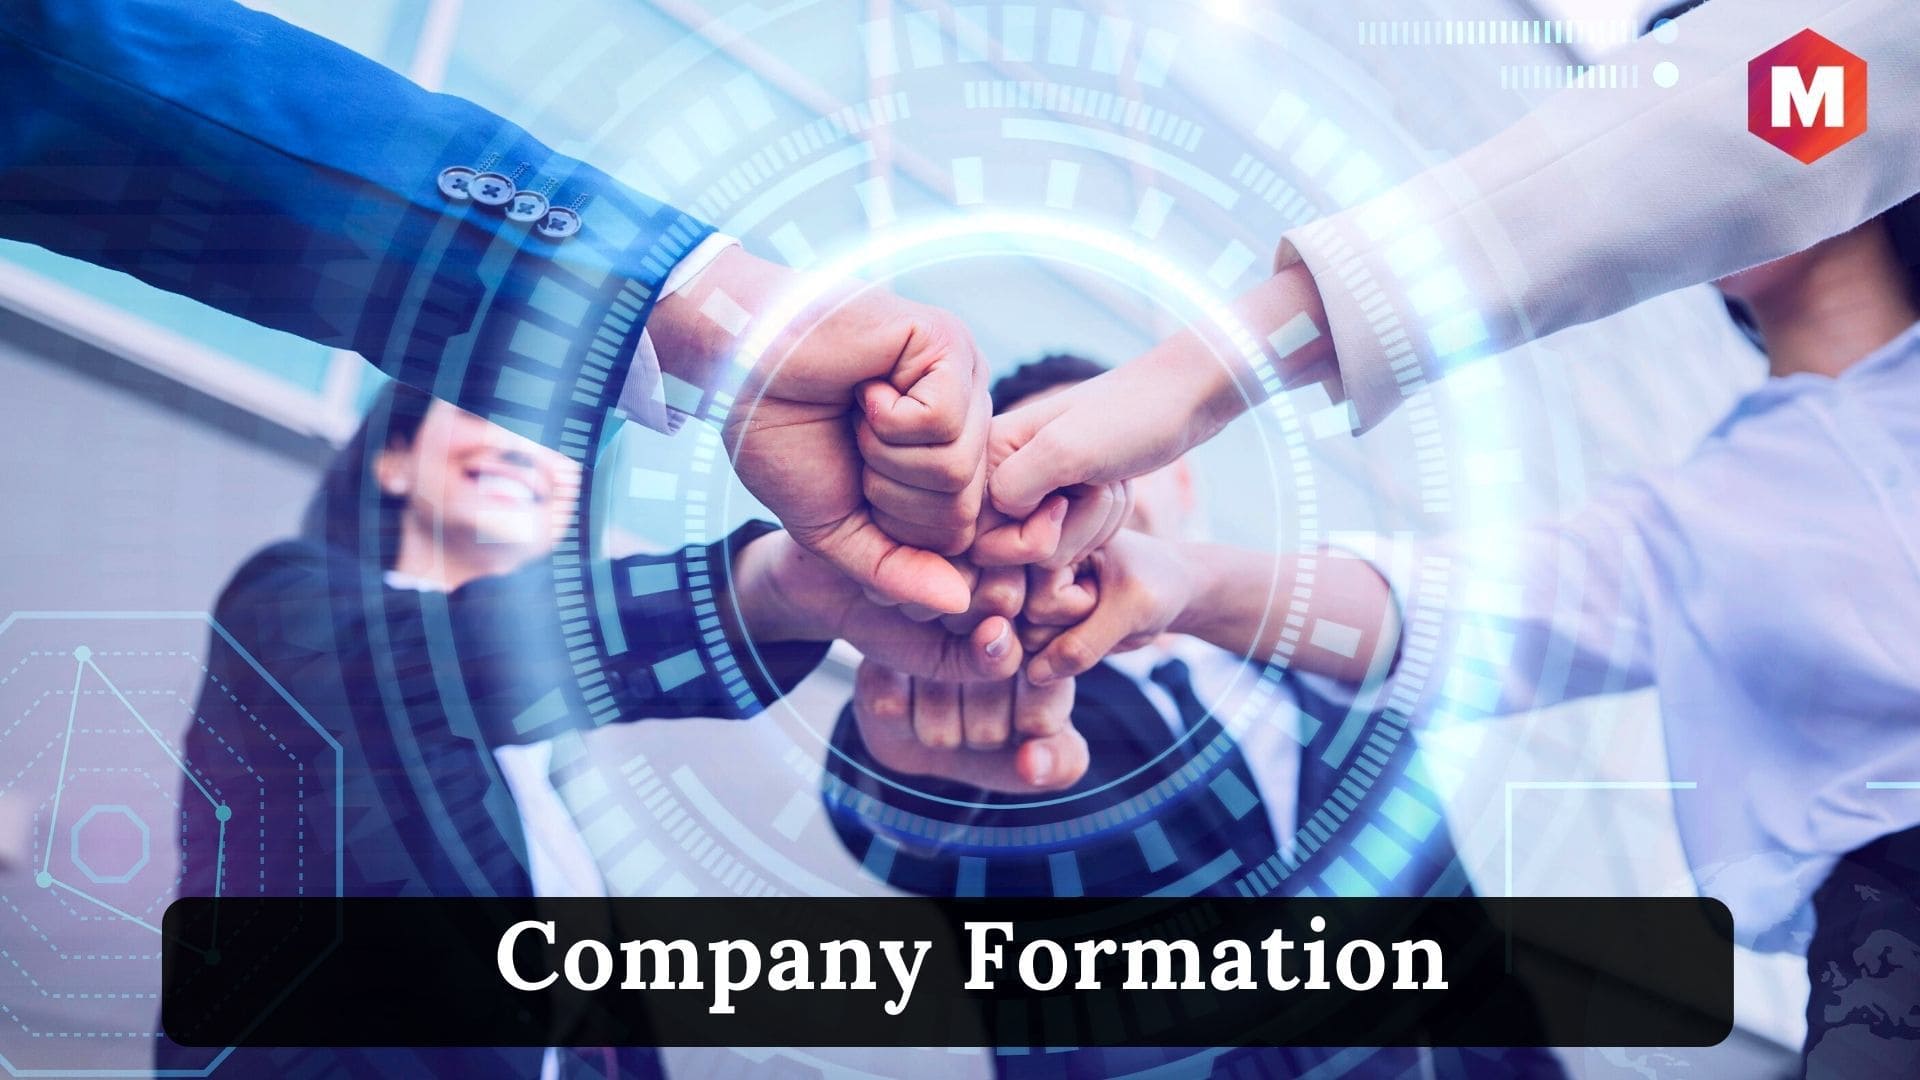 Company Formation - Definition and Process | Marketing91